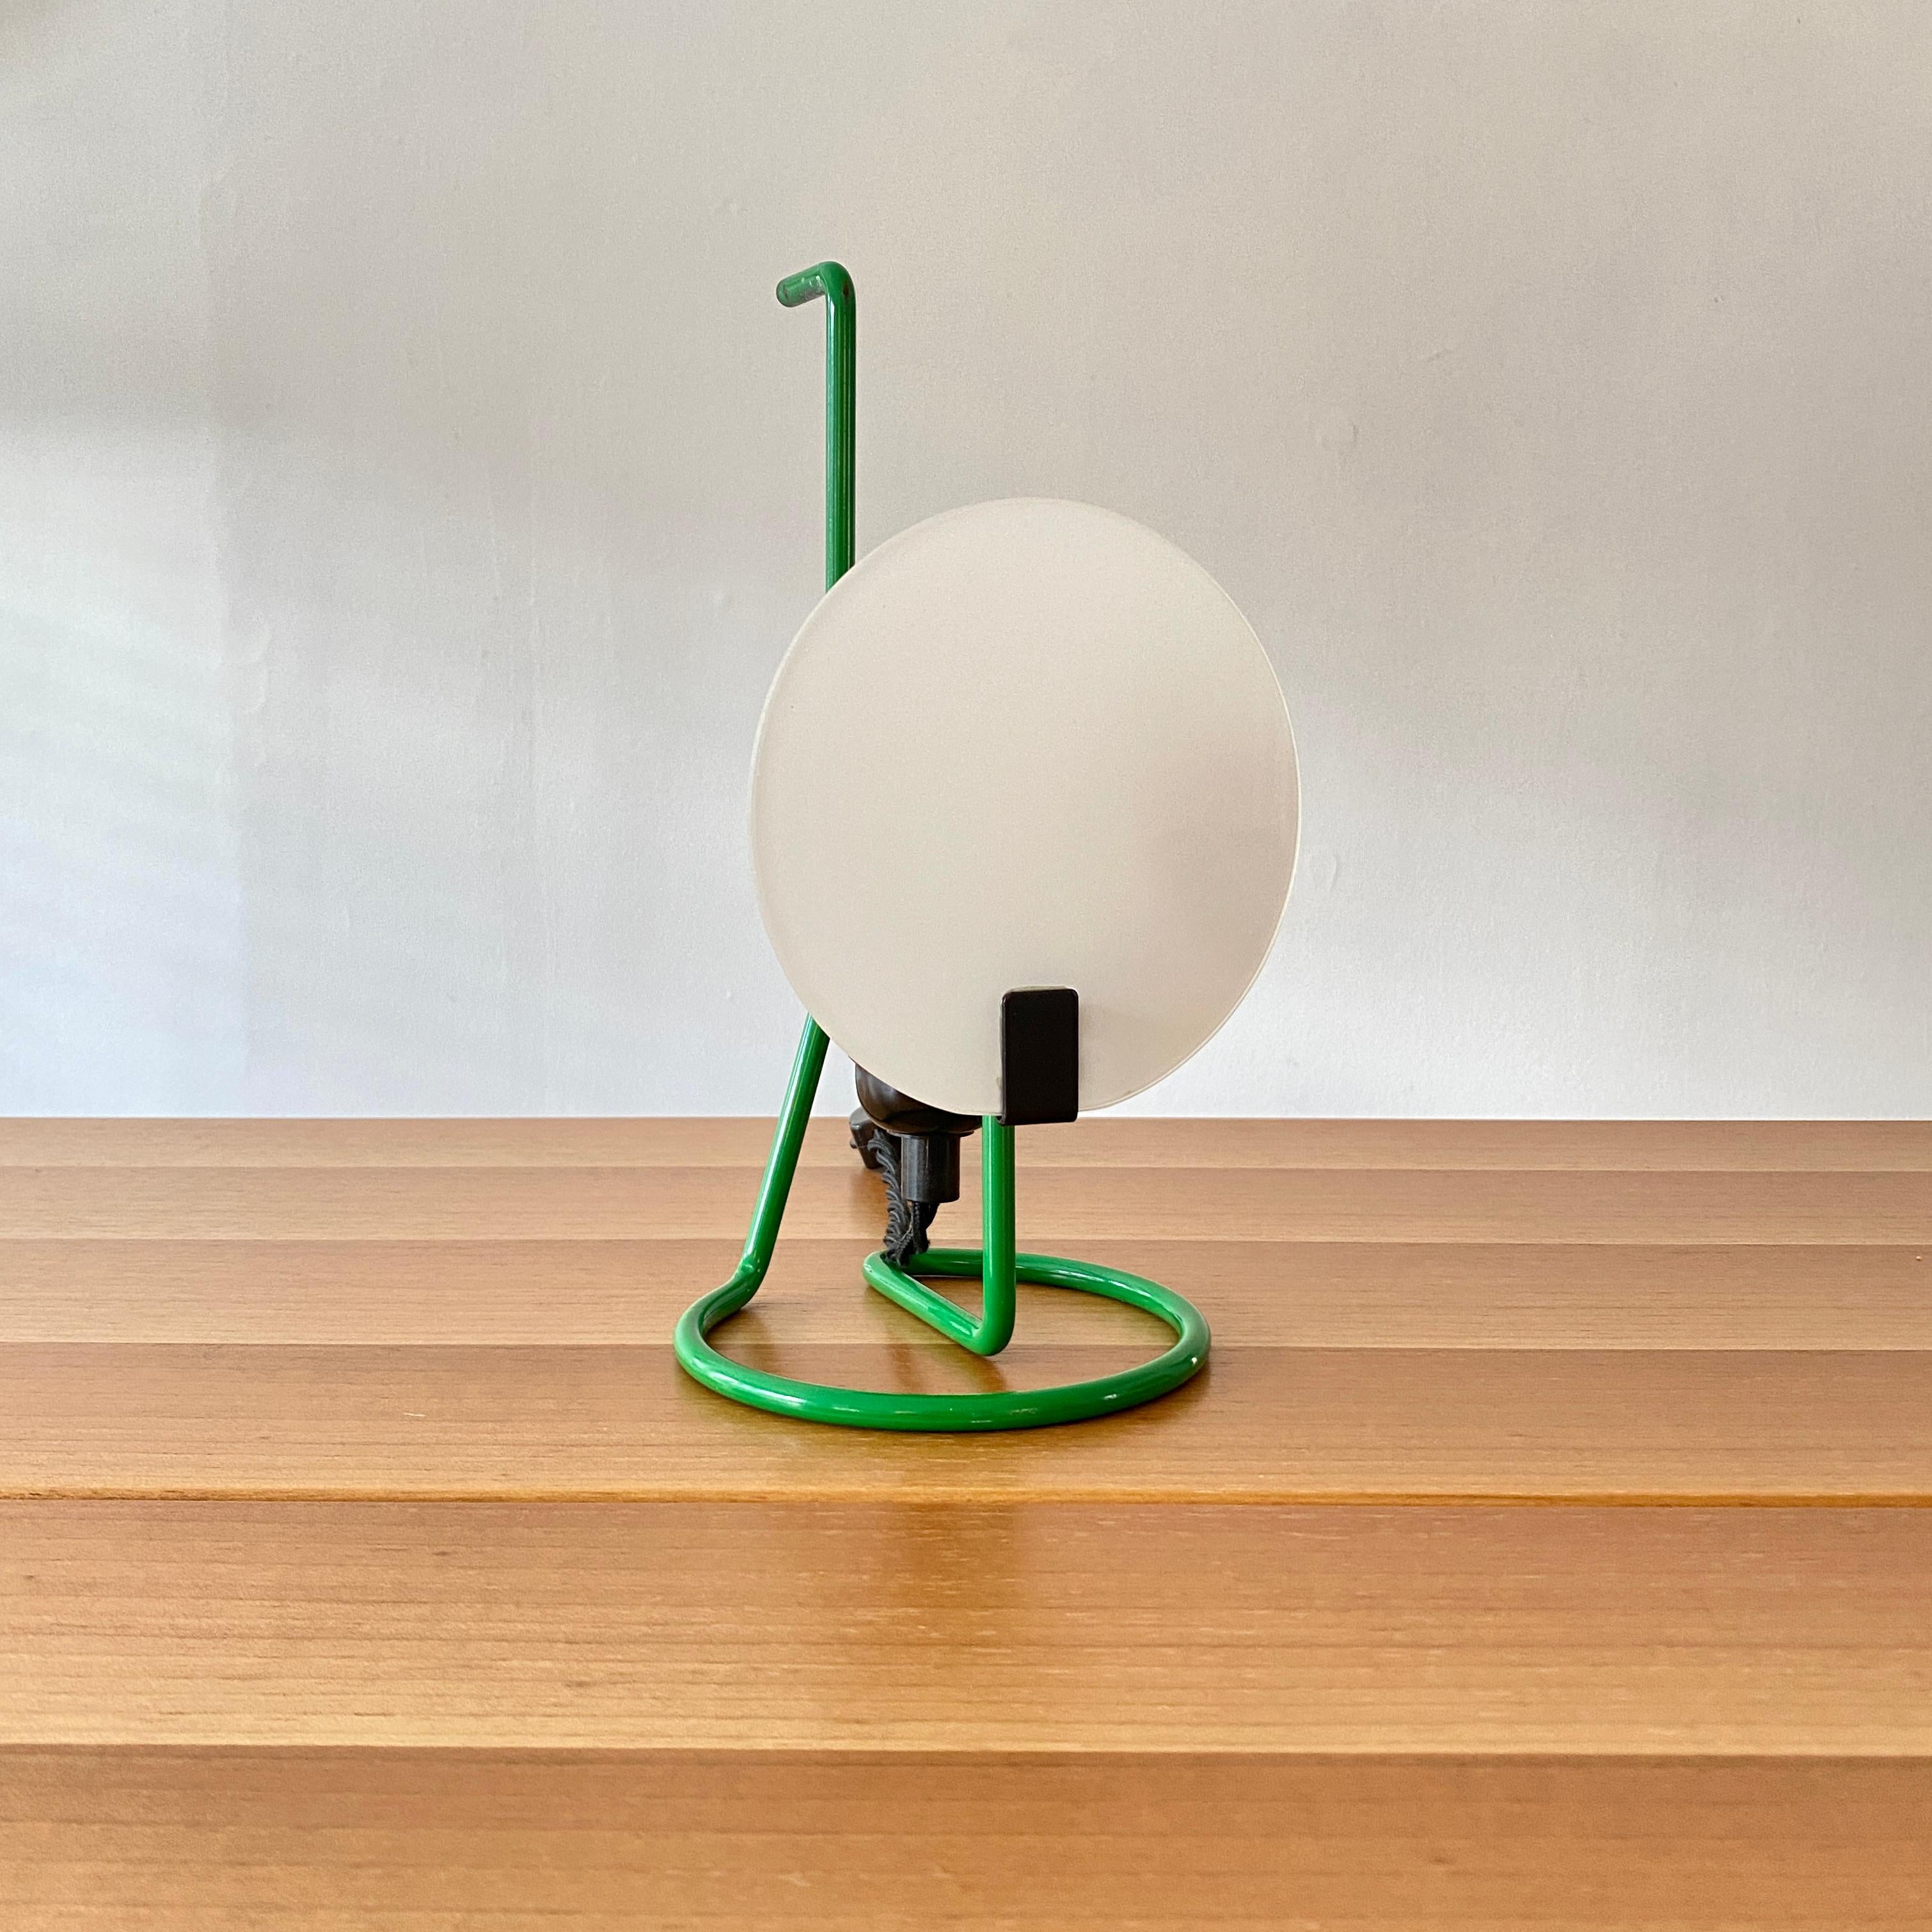 An uncommon diminutive table or accent lamp from Stilnovo. The lamp has a bright green handle / body with an opaque diffuser, the bulb socket is plastic with a 13 foot nylon twist cord, a two stage off / on switch and a vintage inspired plug. The